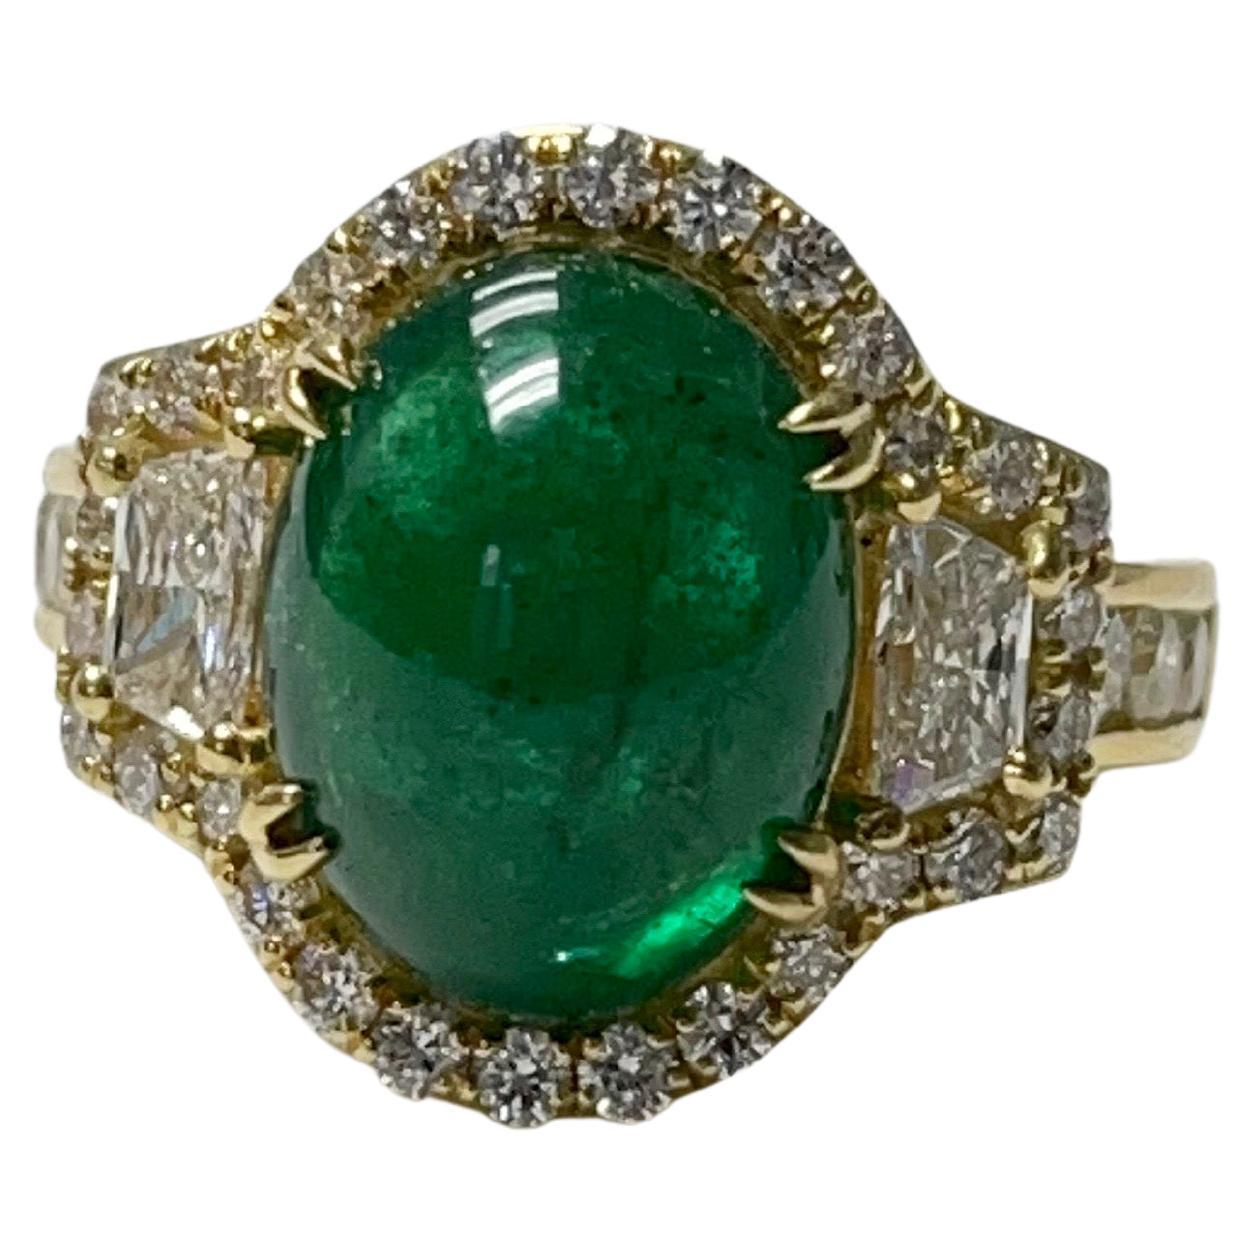 6.08 Carat Oval Emerald Cabochon Engagement Ring in 18K Yellow Gold